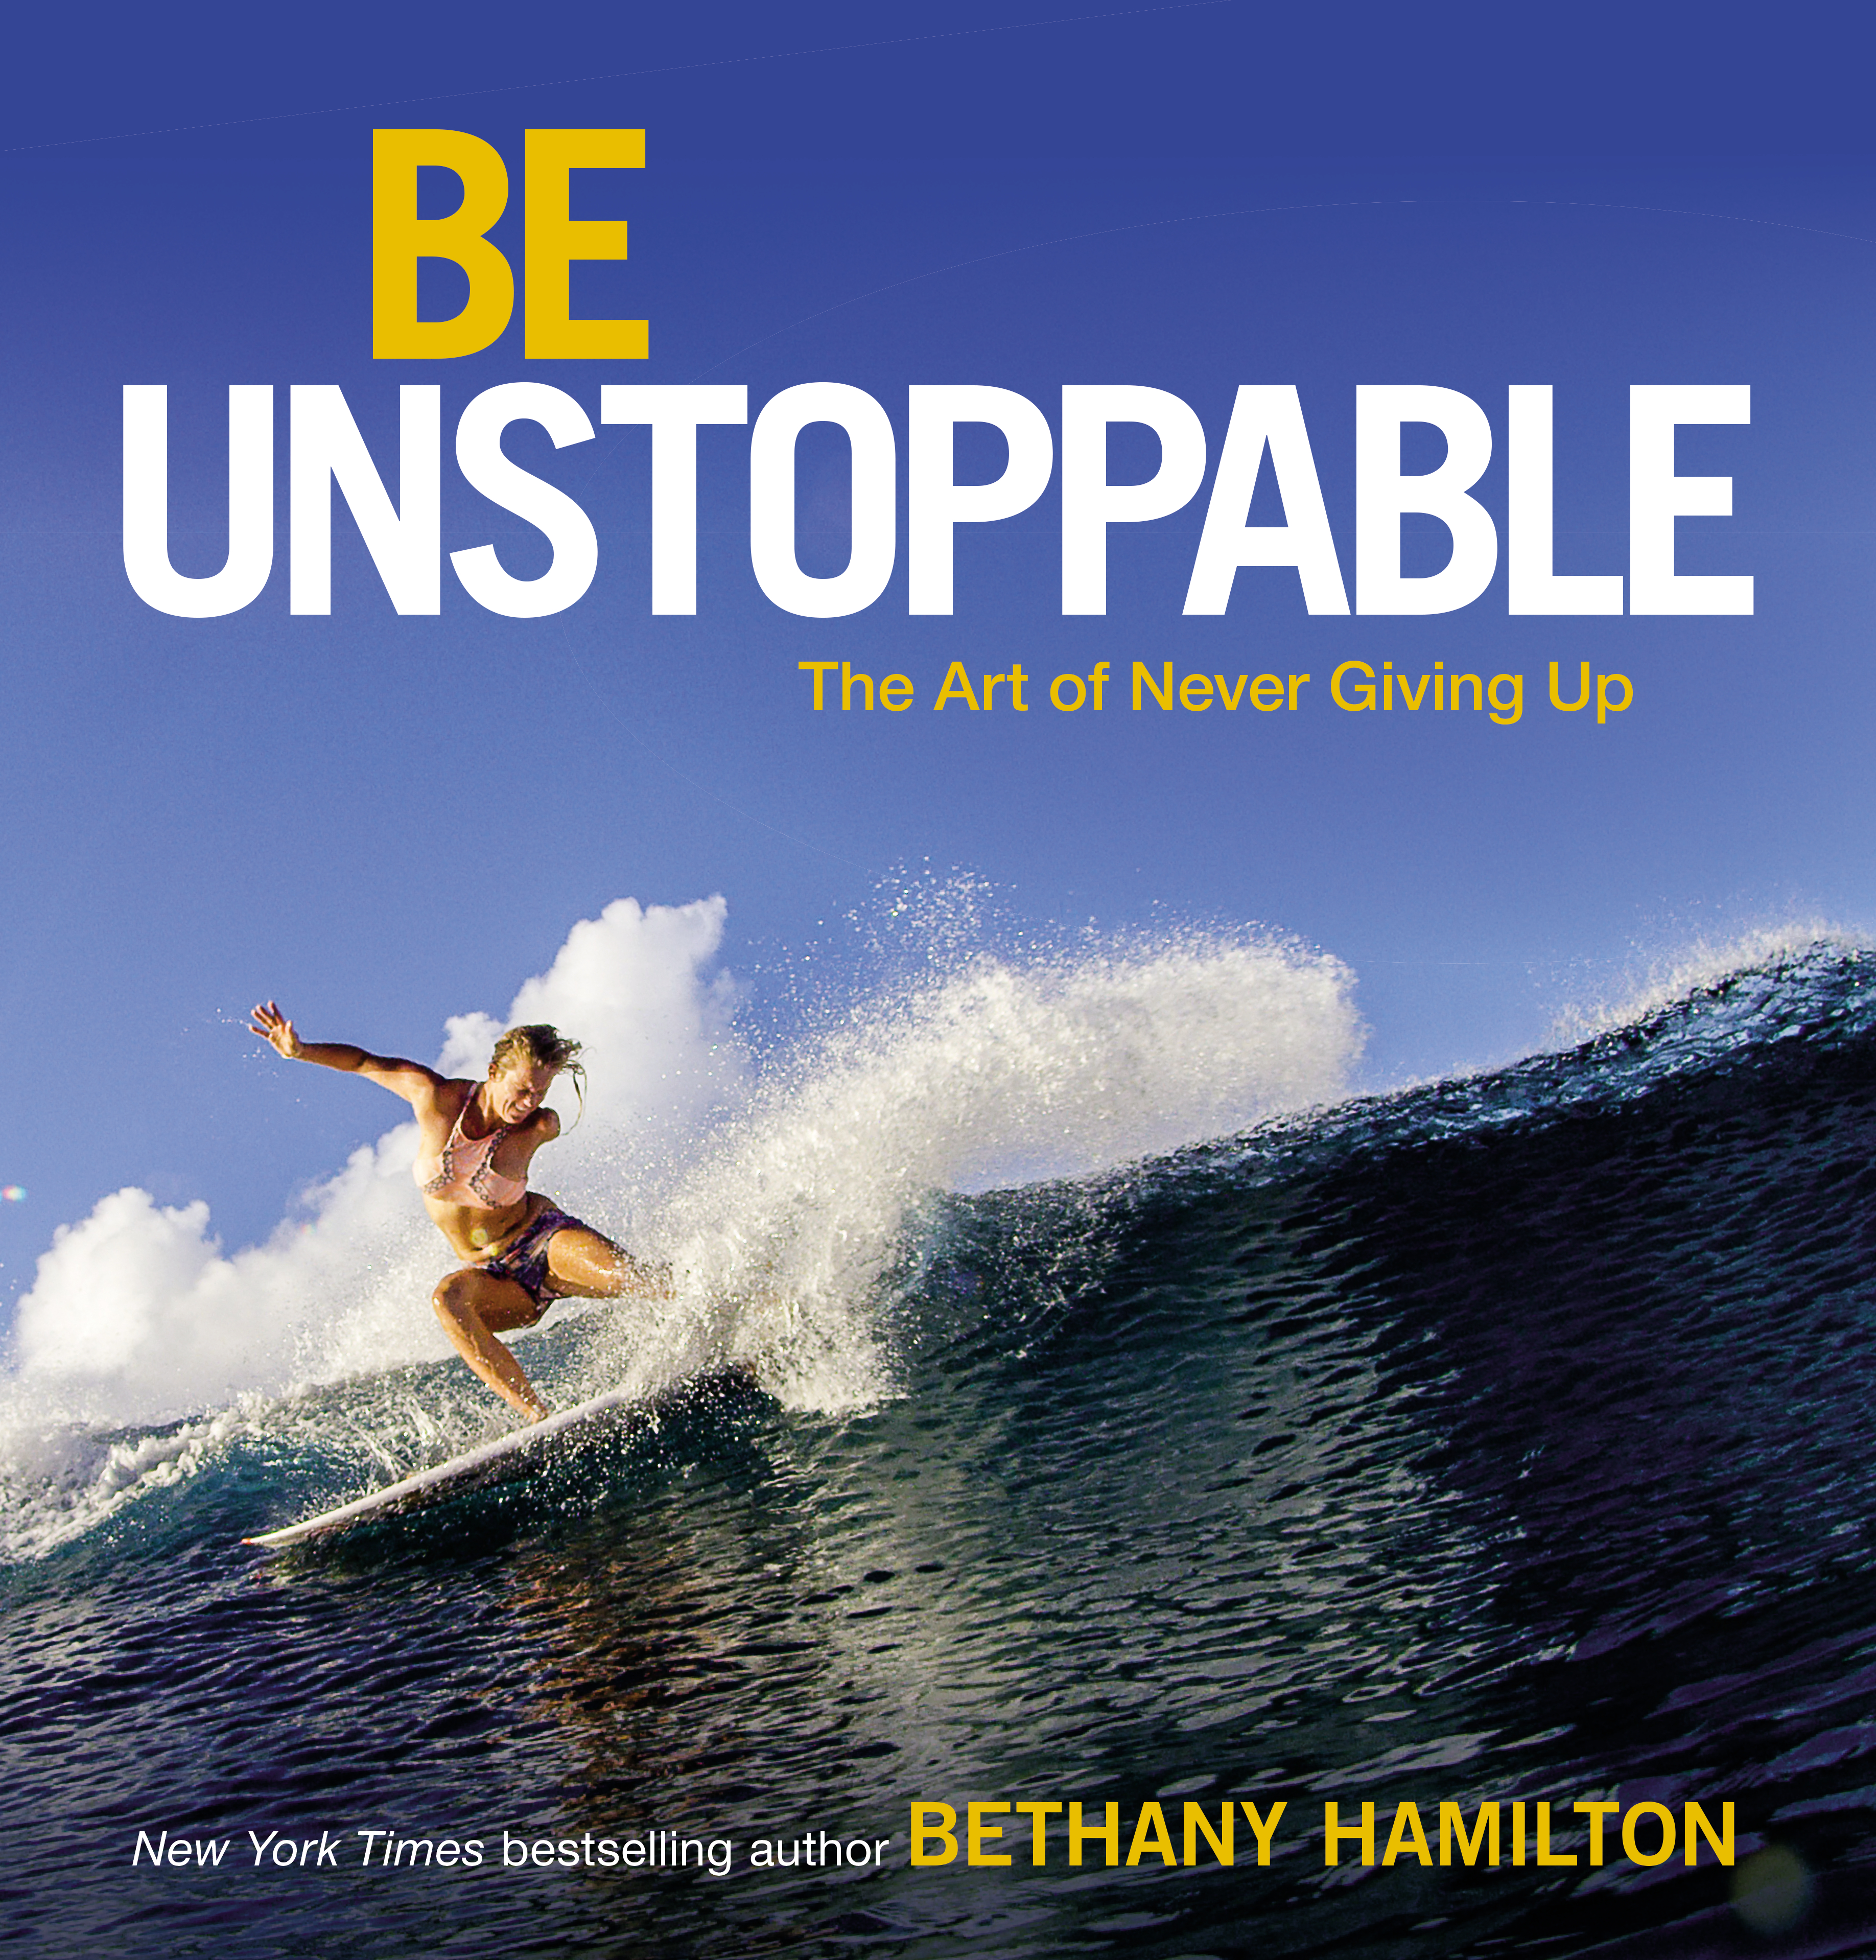 Bethany Hamilton - Be Unstoppable - the art of never giving up